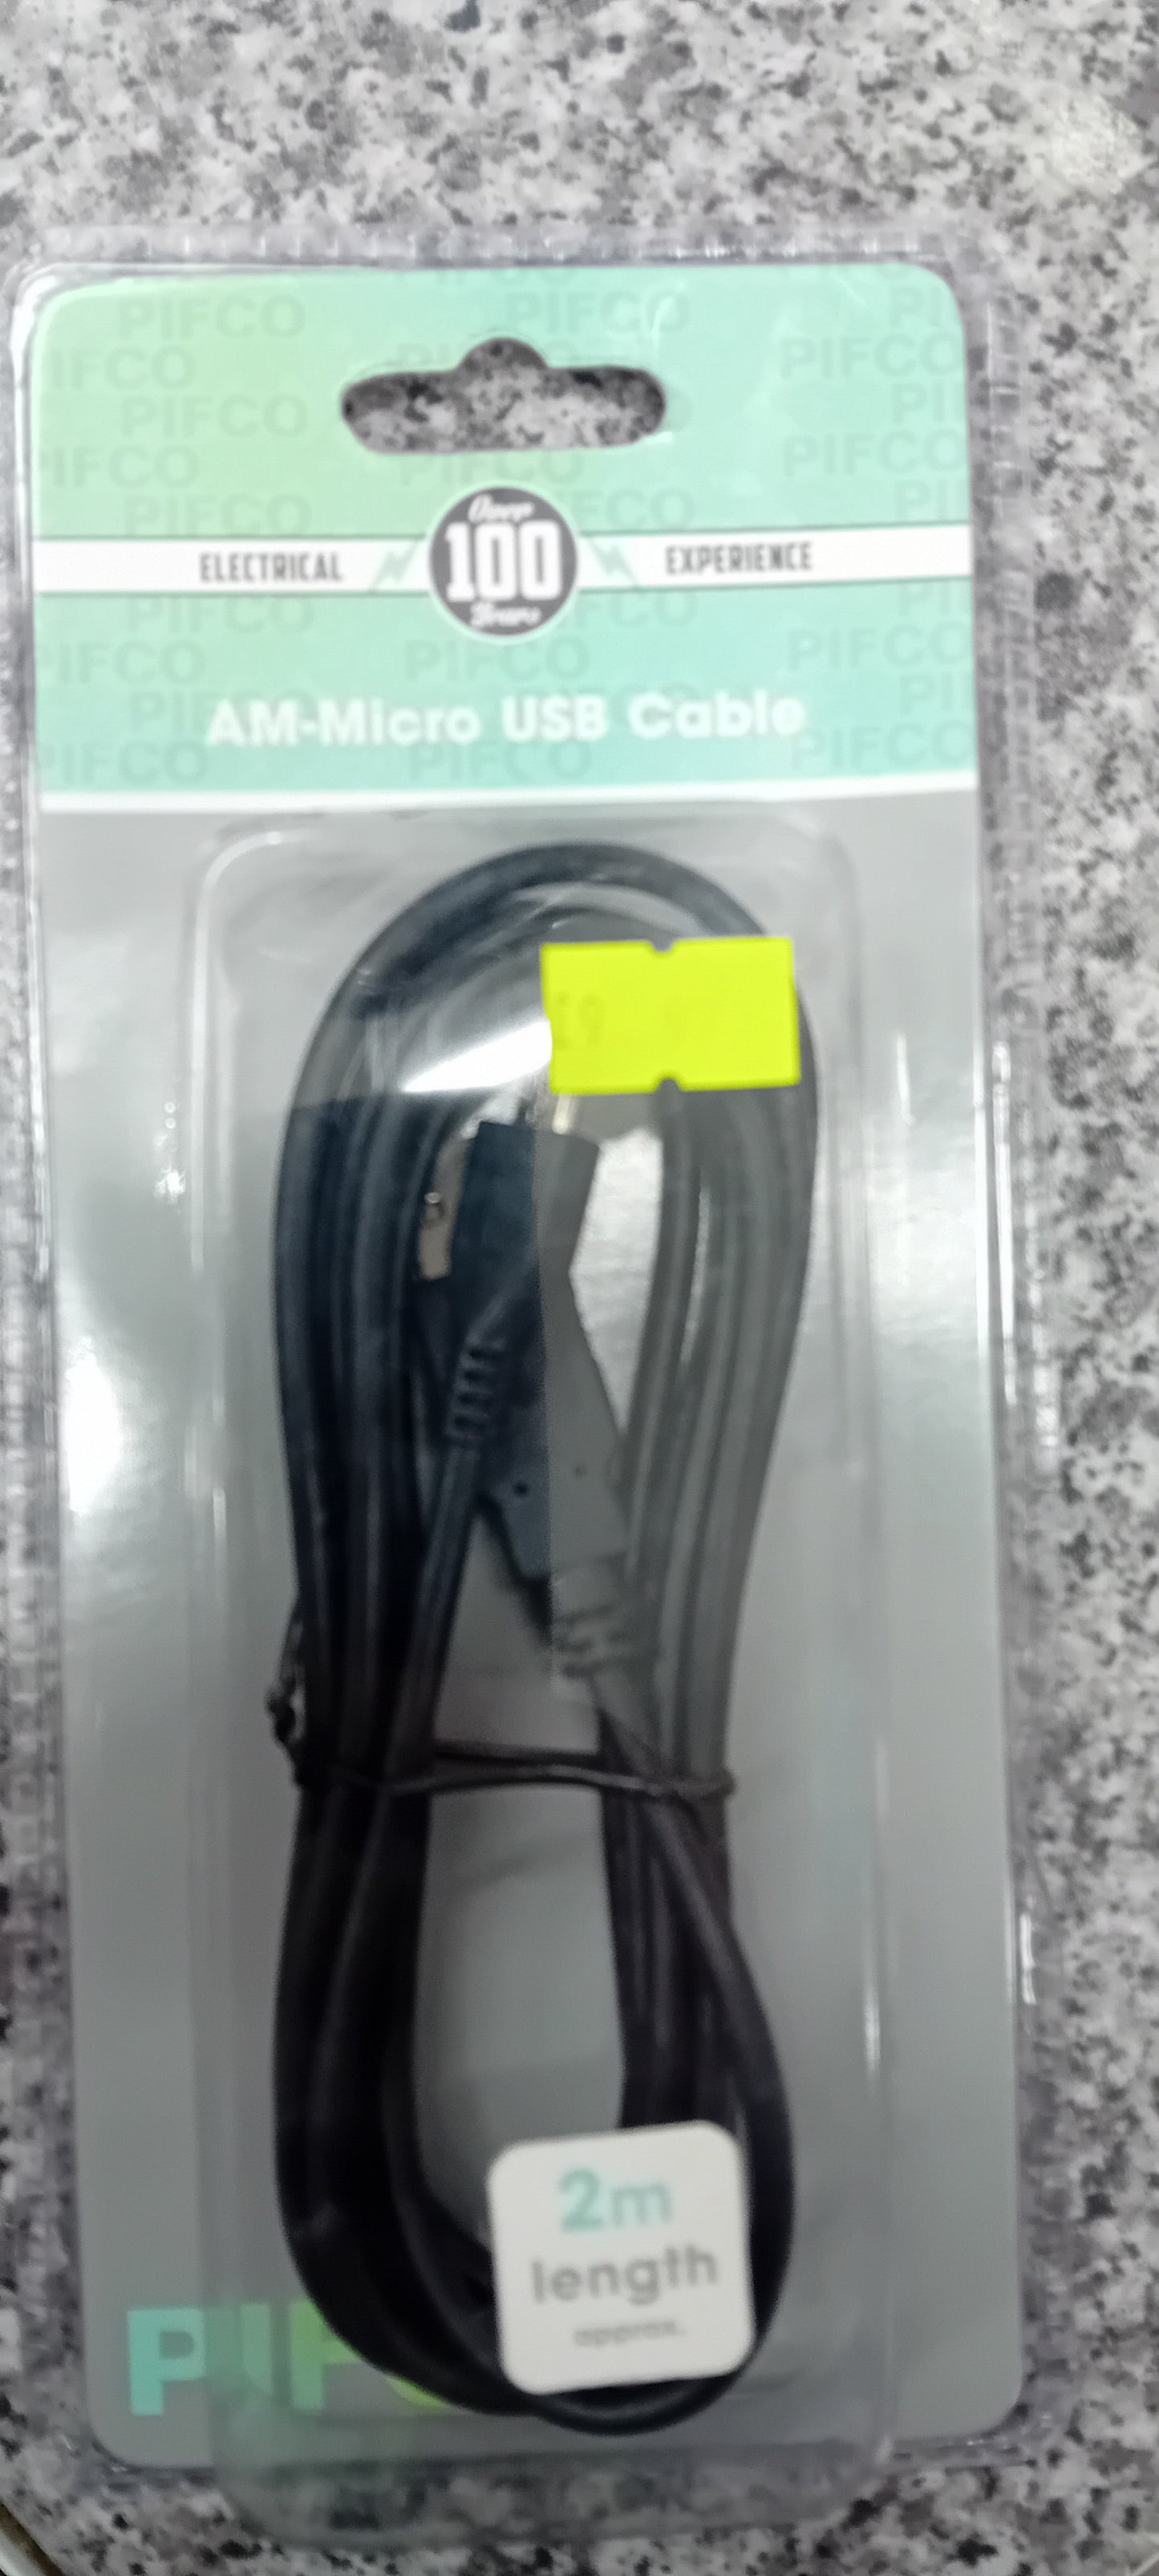 AM-Micro USB Cable